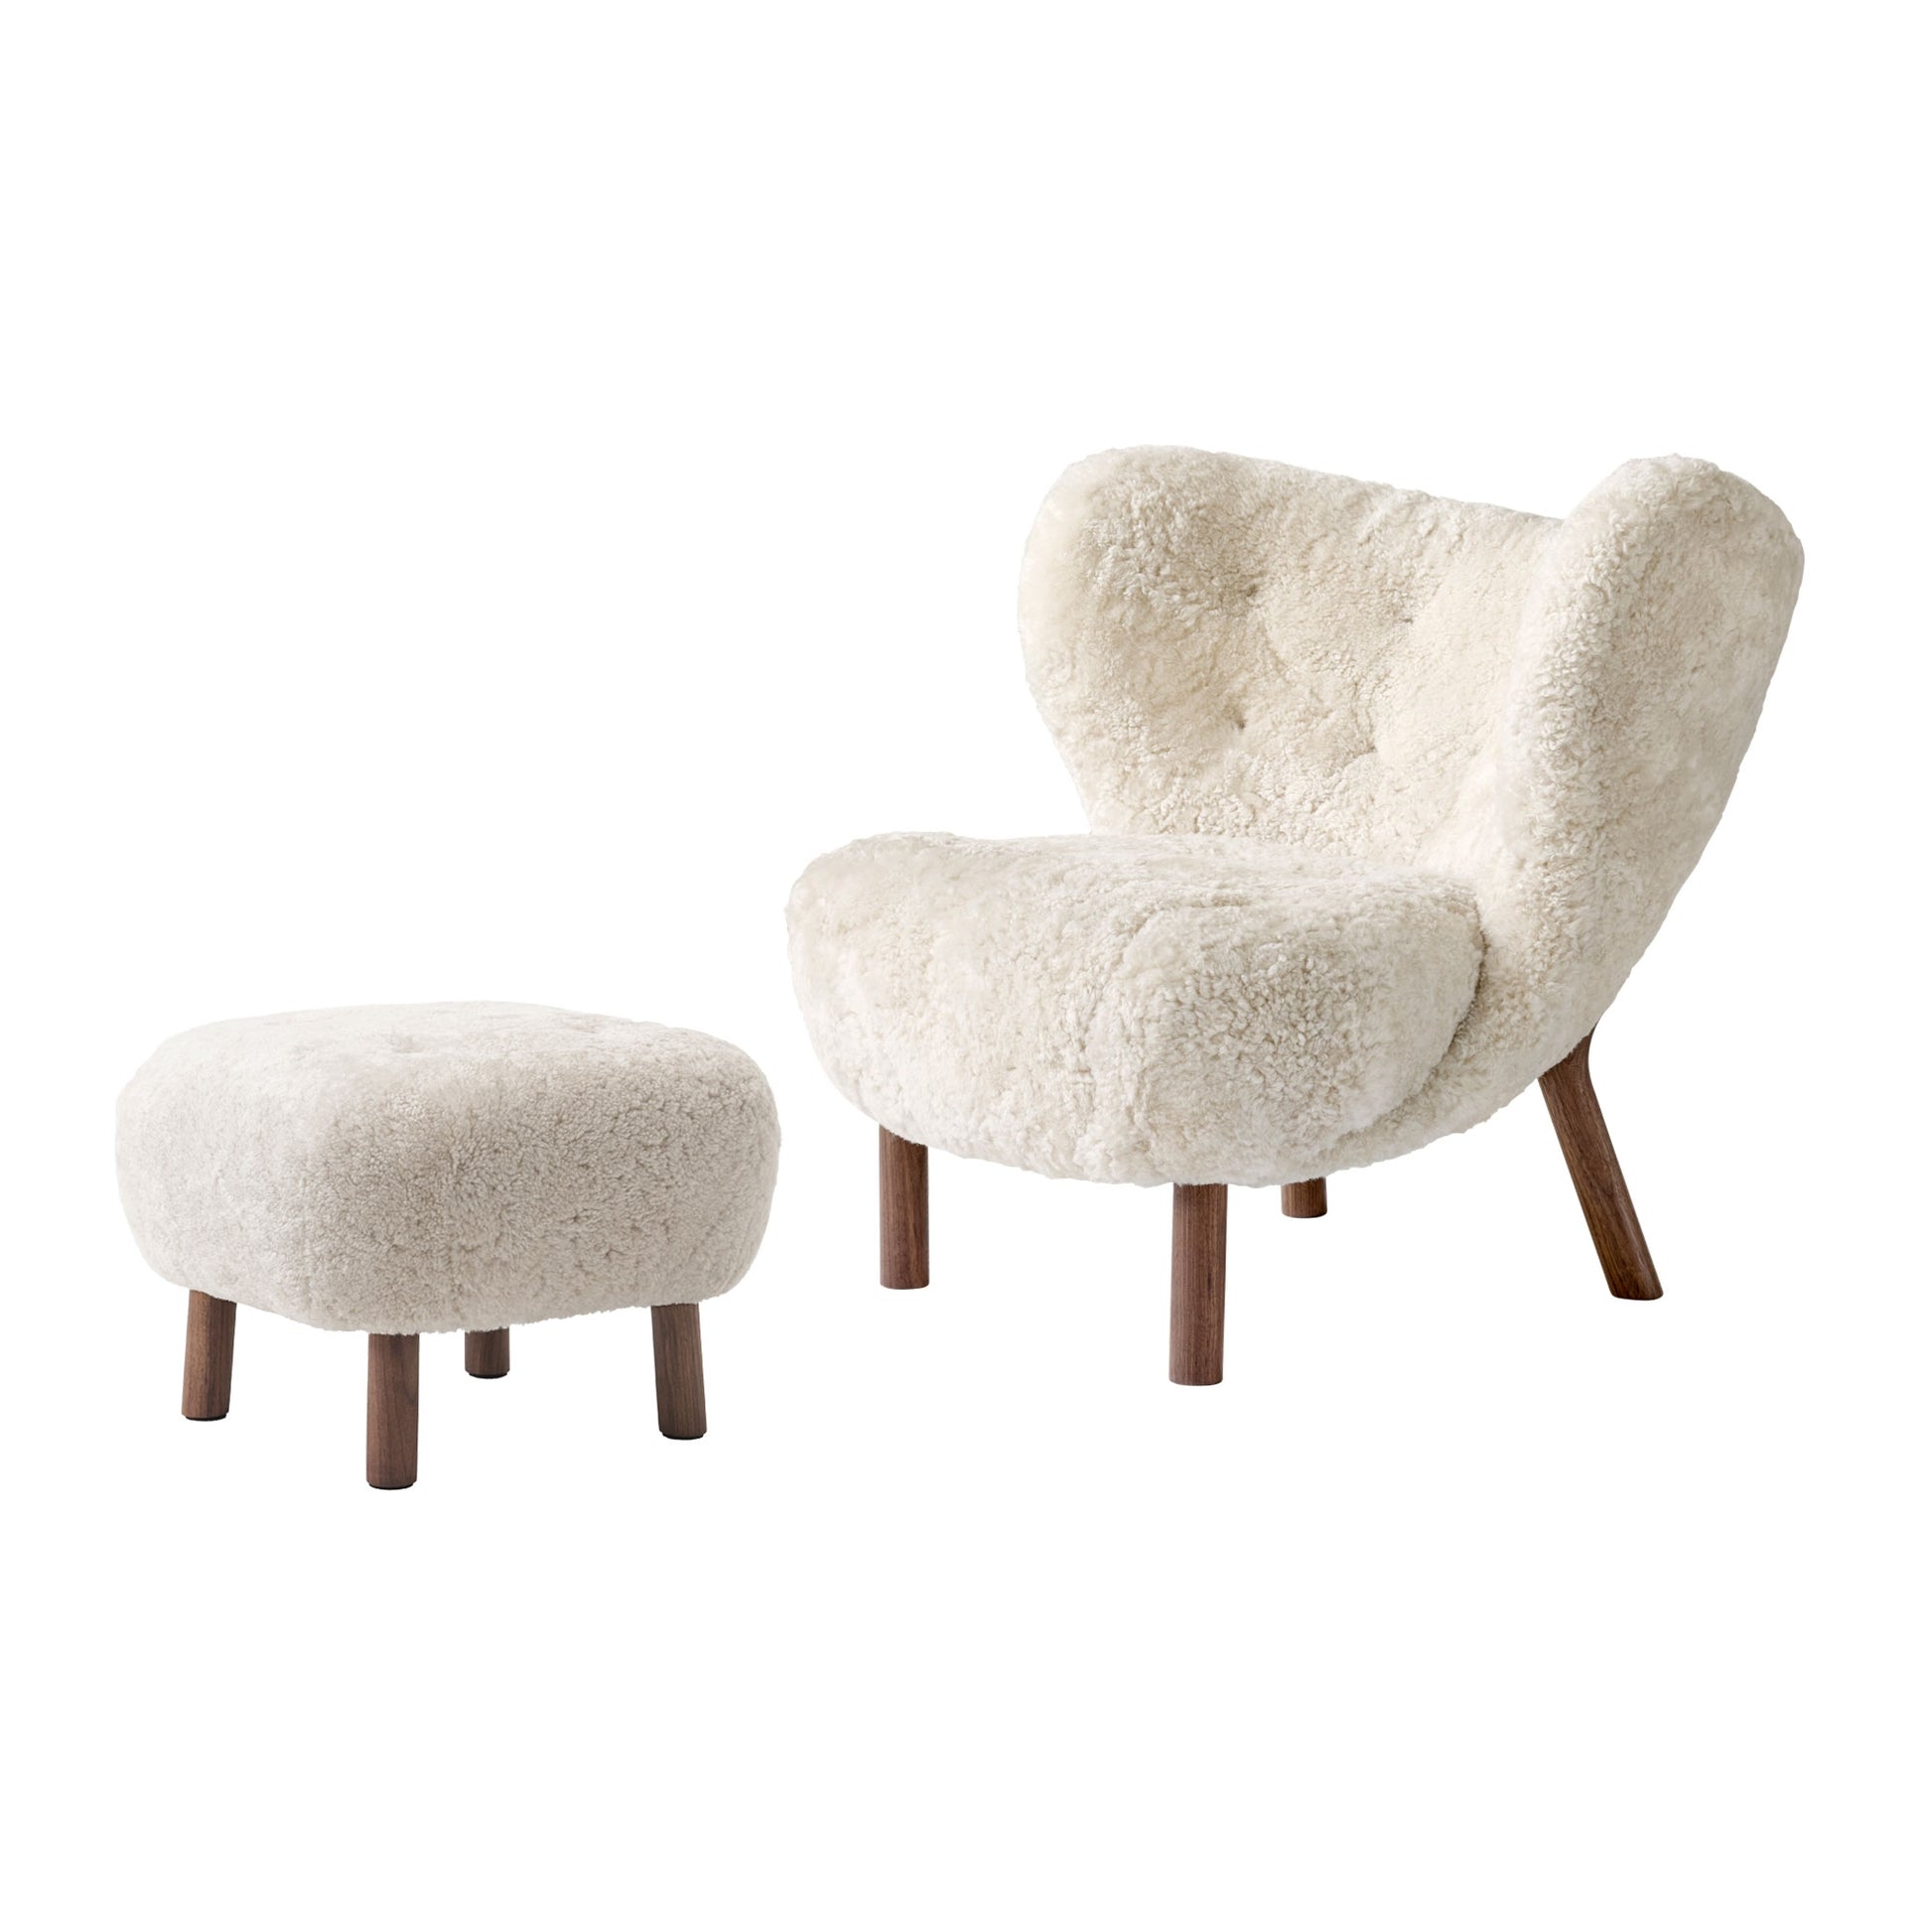 Little Petra VB1 Armchair with ATD1 Pouf by &tradition #Sheepskin Moonlight/Walnut